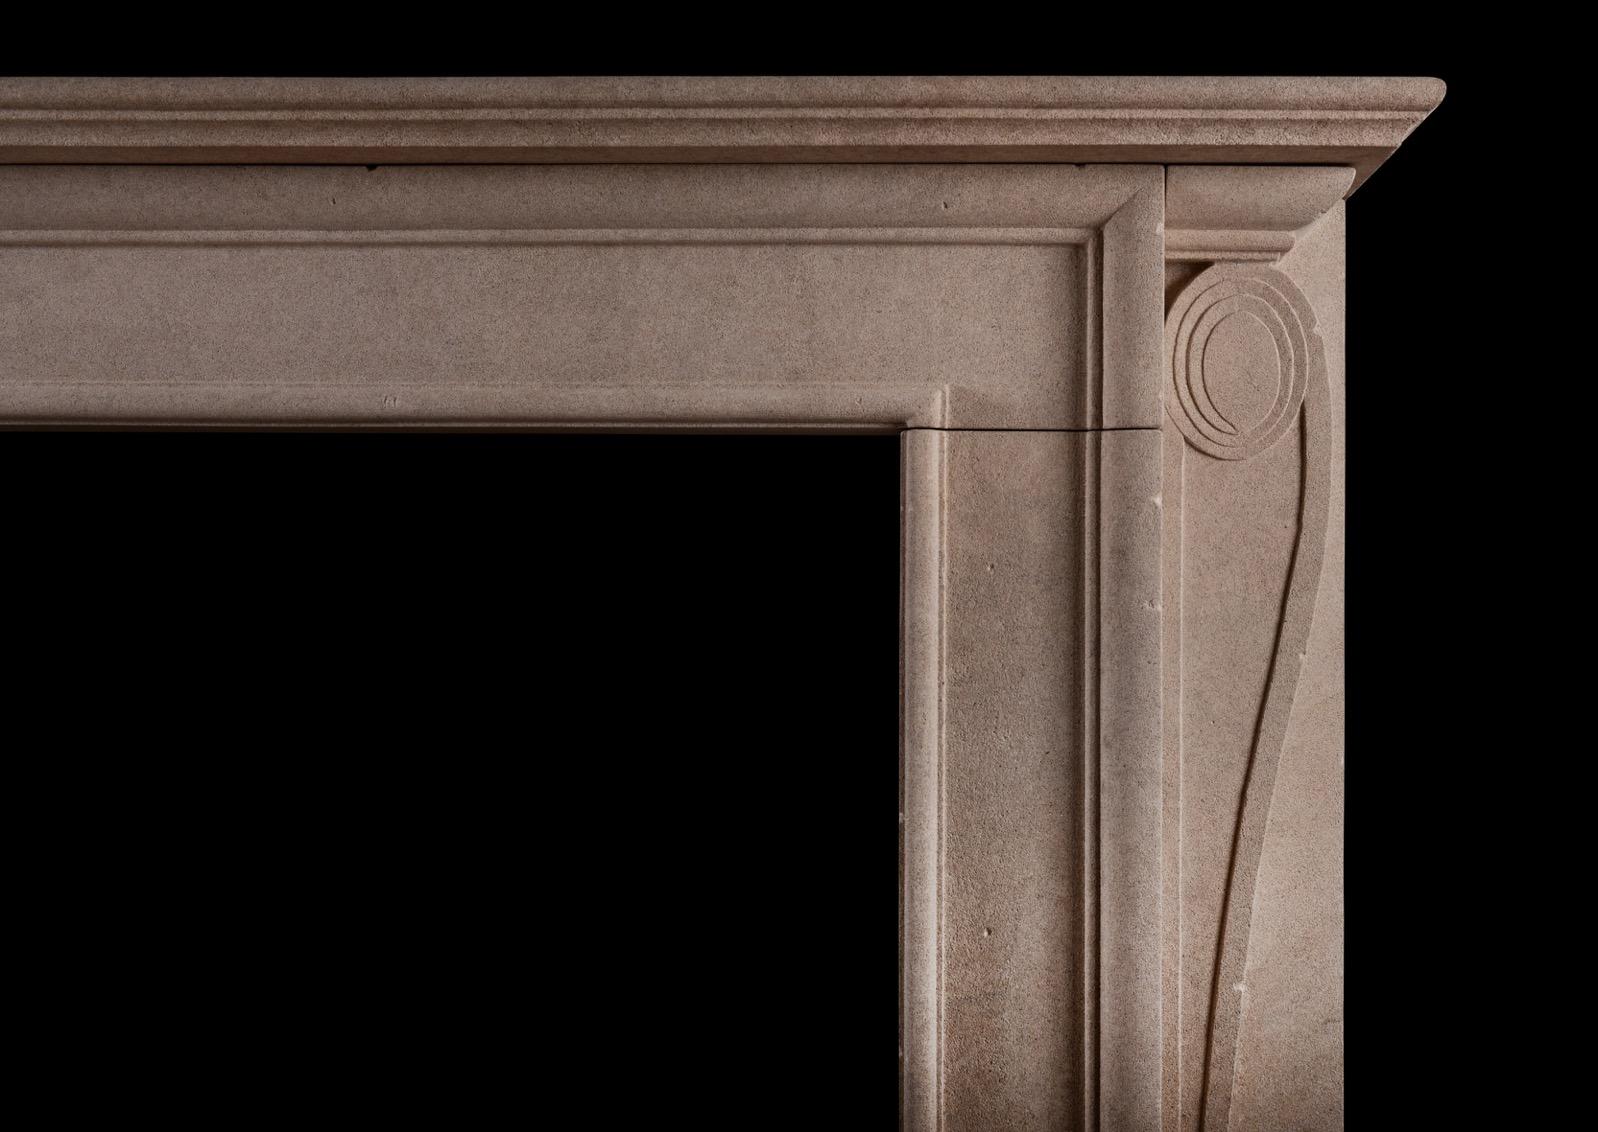 An English Bath stone fireplace in the Georgian style. The shaped jambs  surmounted by elegantly carved scrolls. The plain frieze surmounted by moulded shelf above. A copy of a period original from a property in Mayfair. Part of the Colefax & Fowler